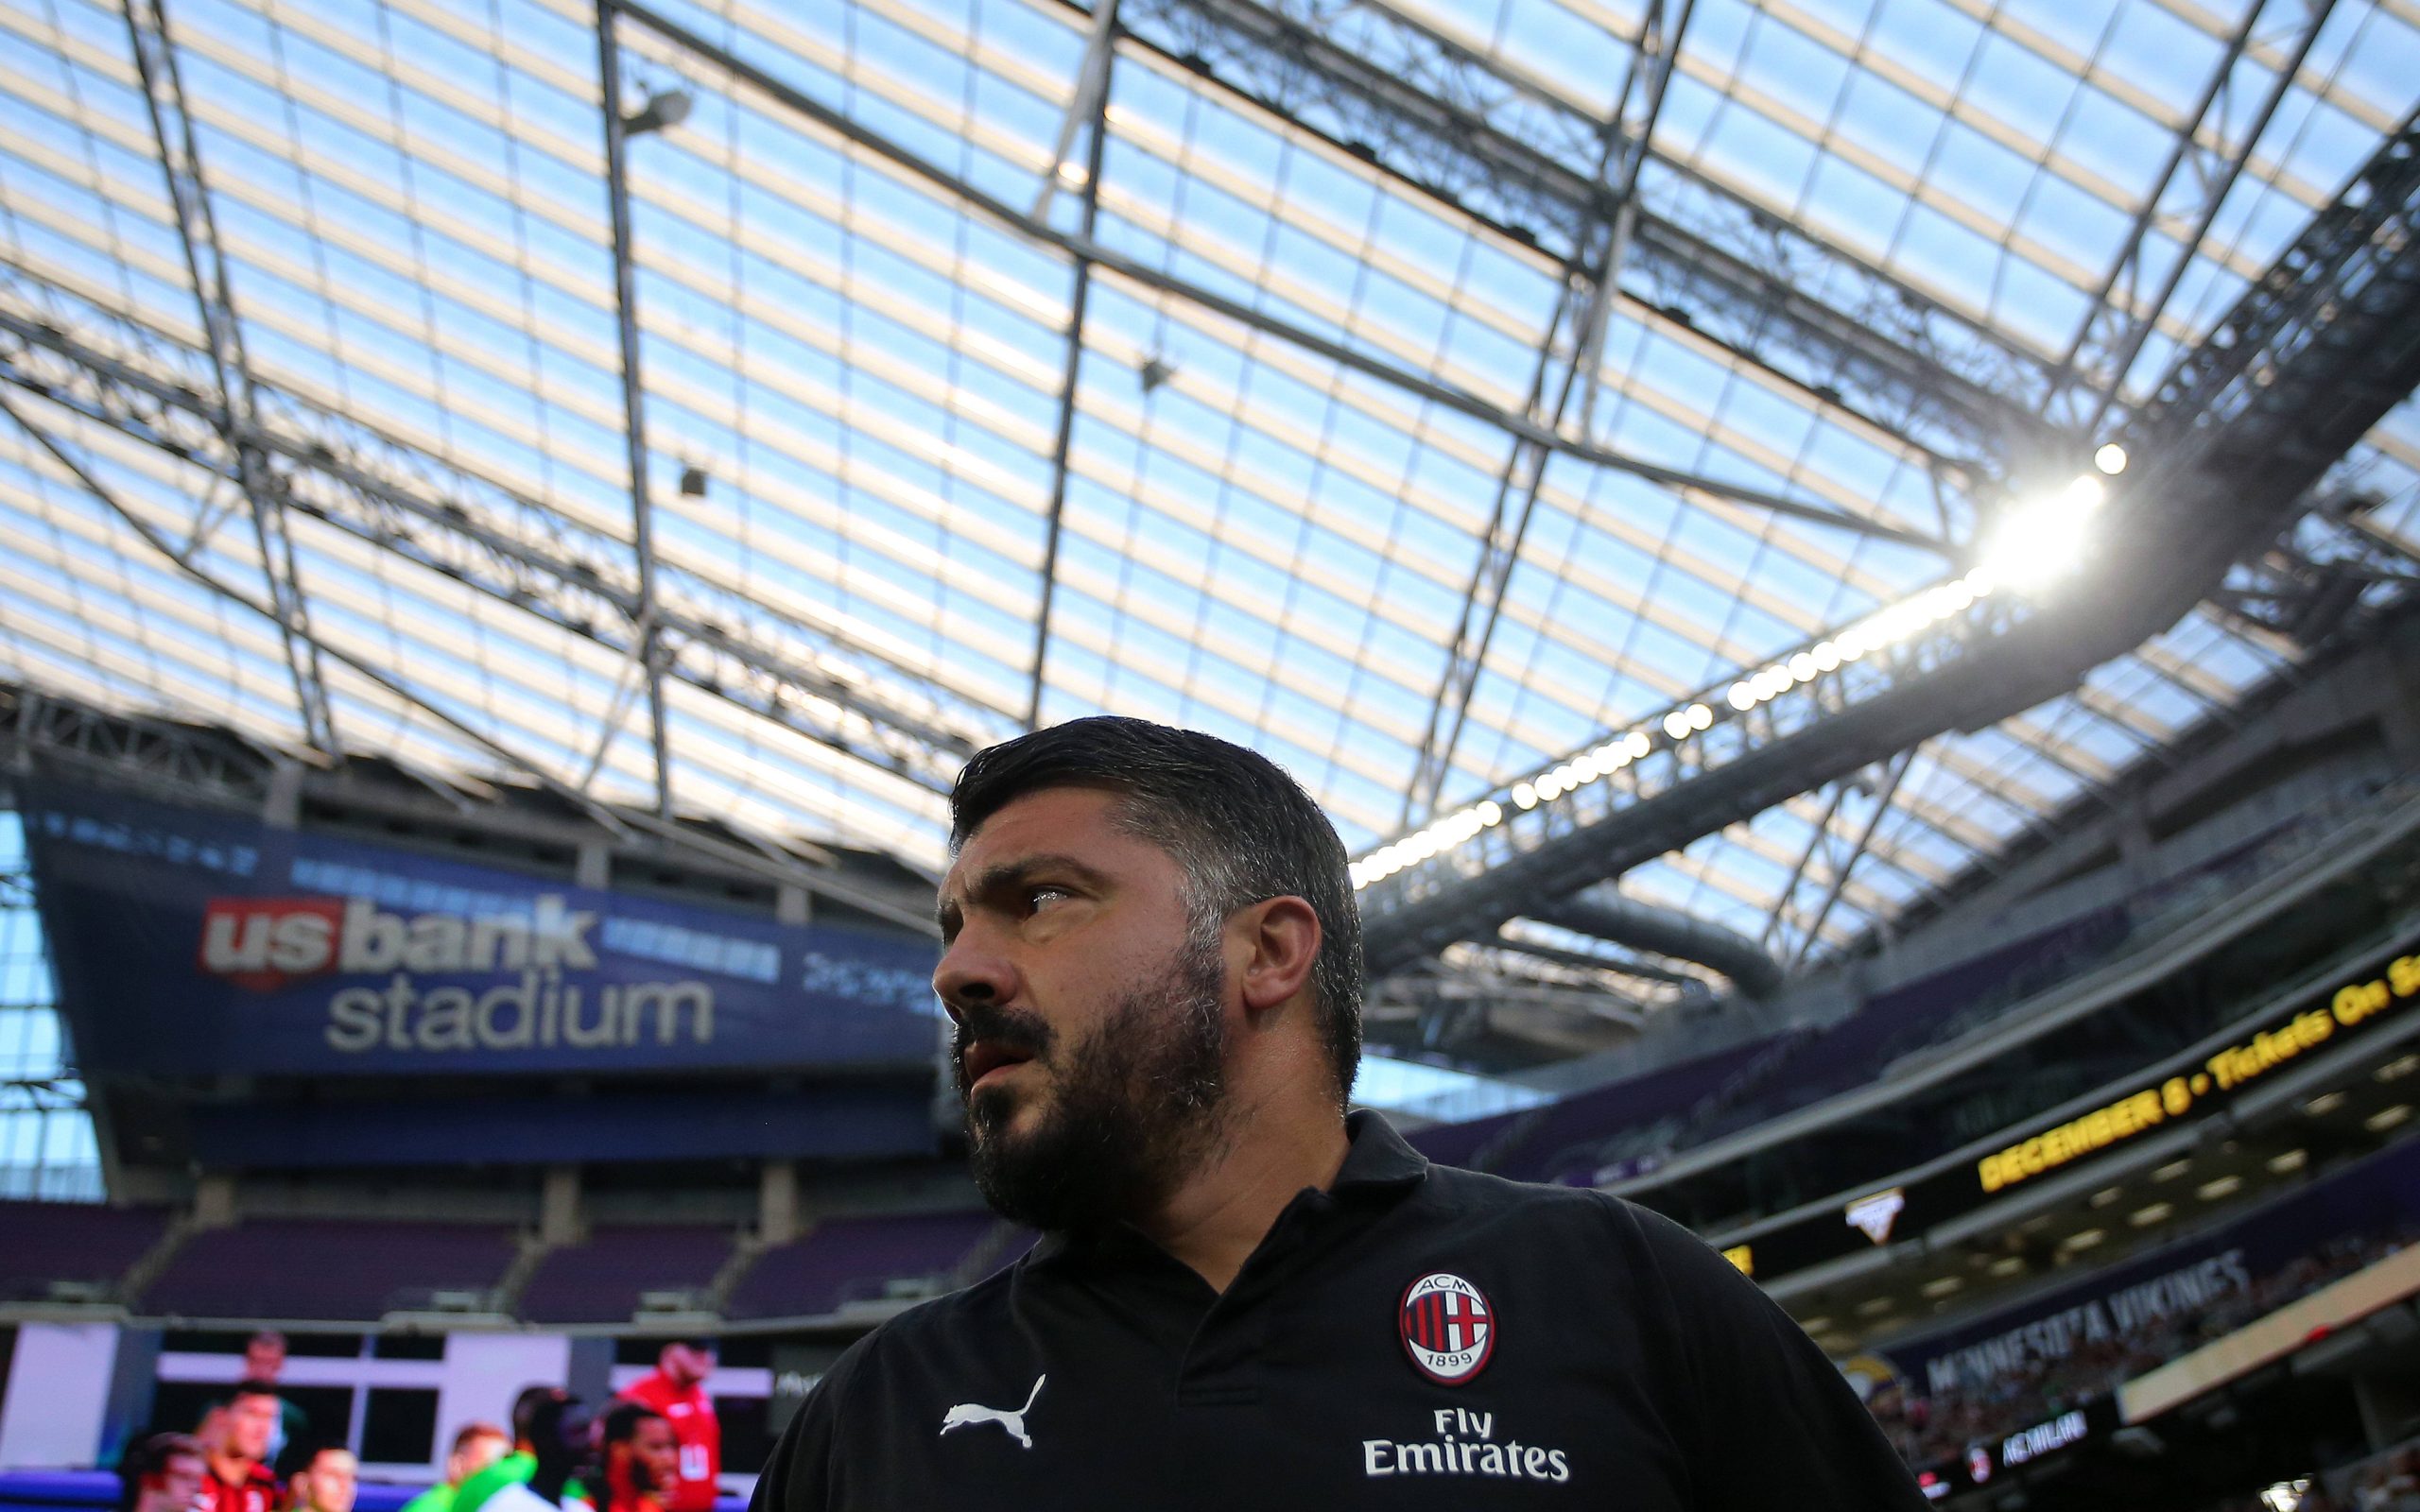 Could Gennaro Gattuso become Tottenham Hotspur's new manager?